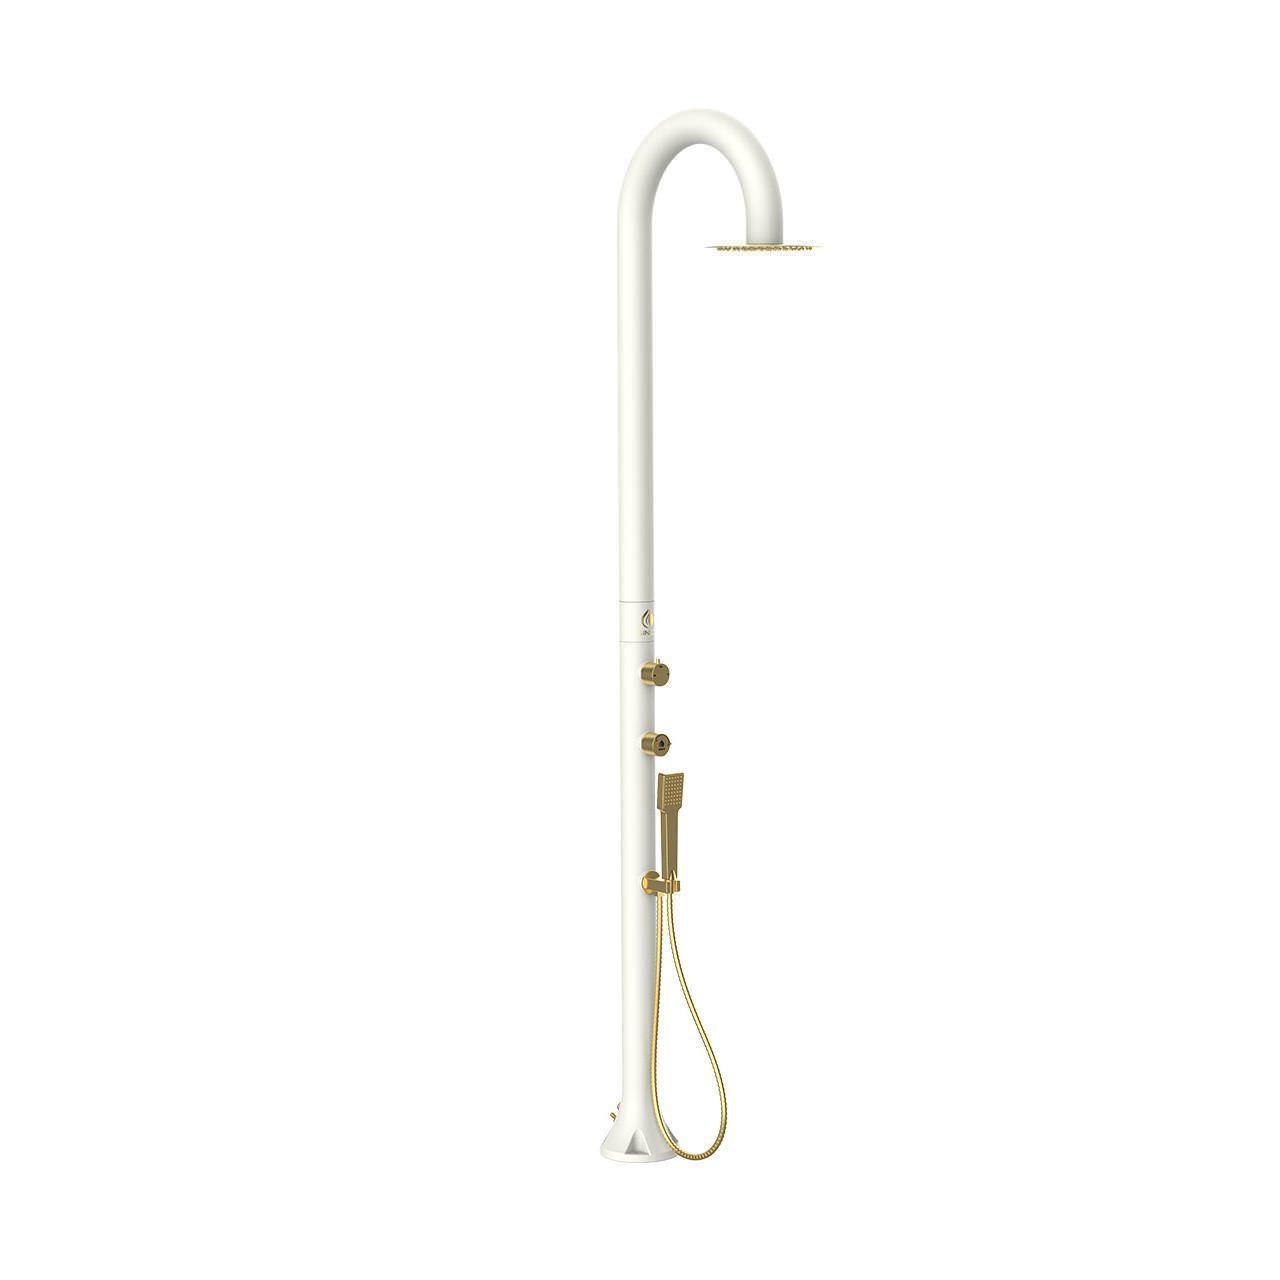 Gold white shower with mobile hand showe